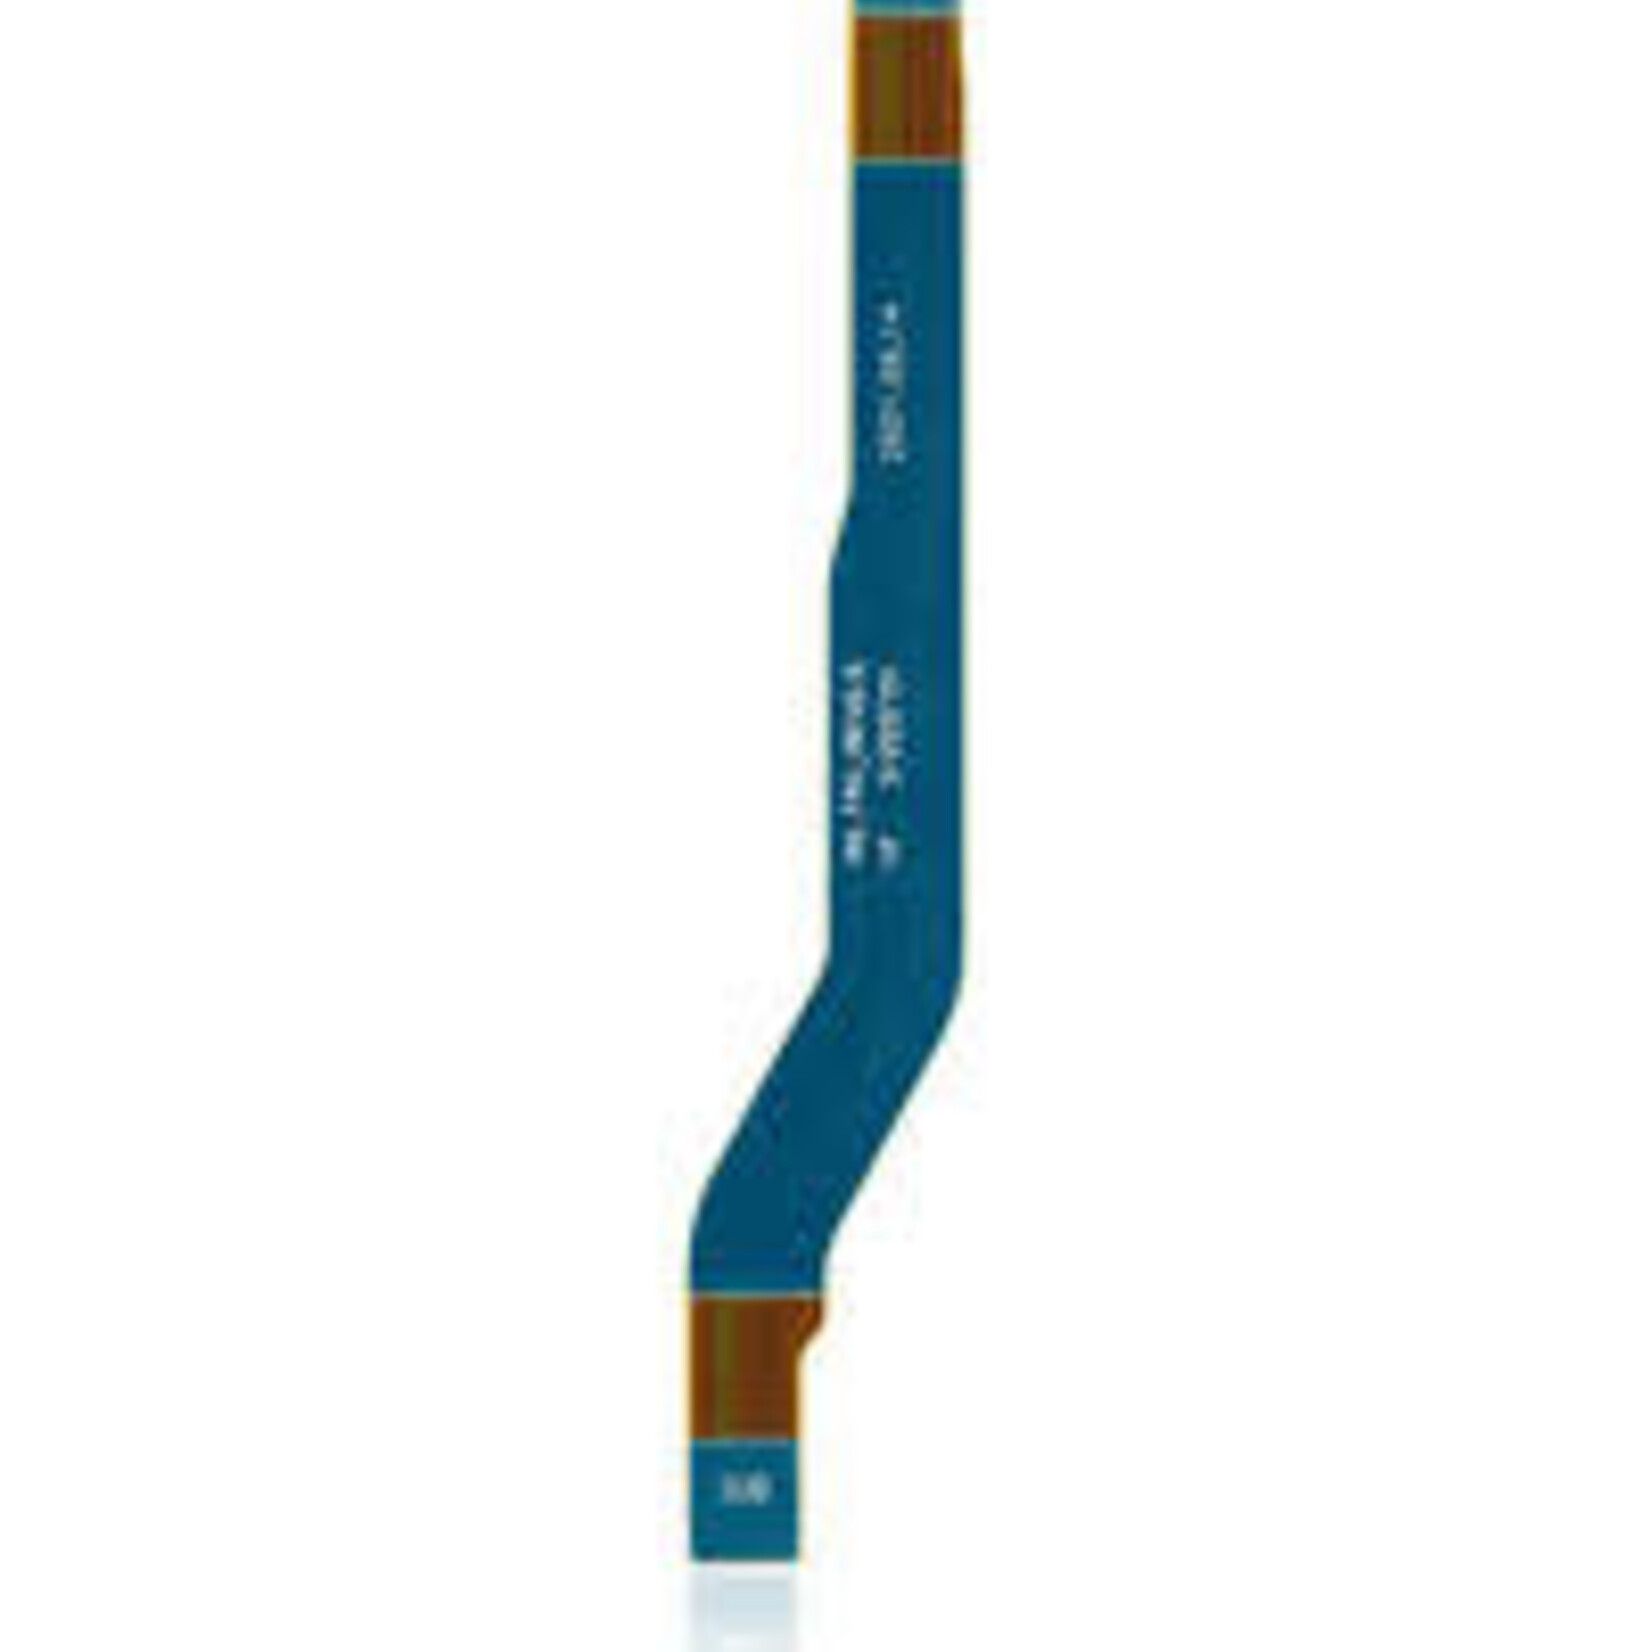 ANTENNA CONNECTING CABLE COMPATIBLE FOR SAMSUNG GALAXY S22 5G